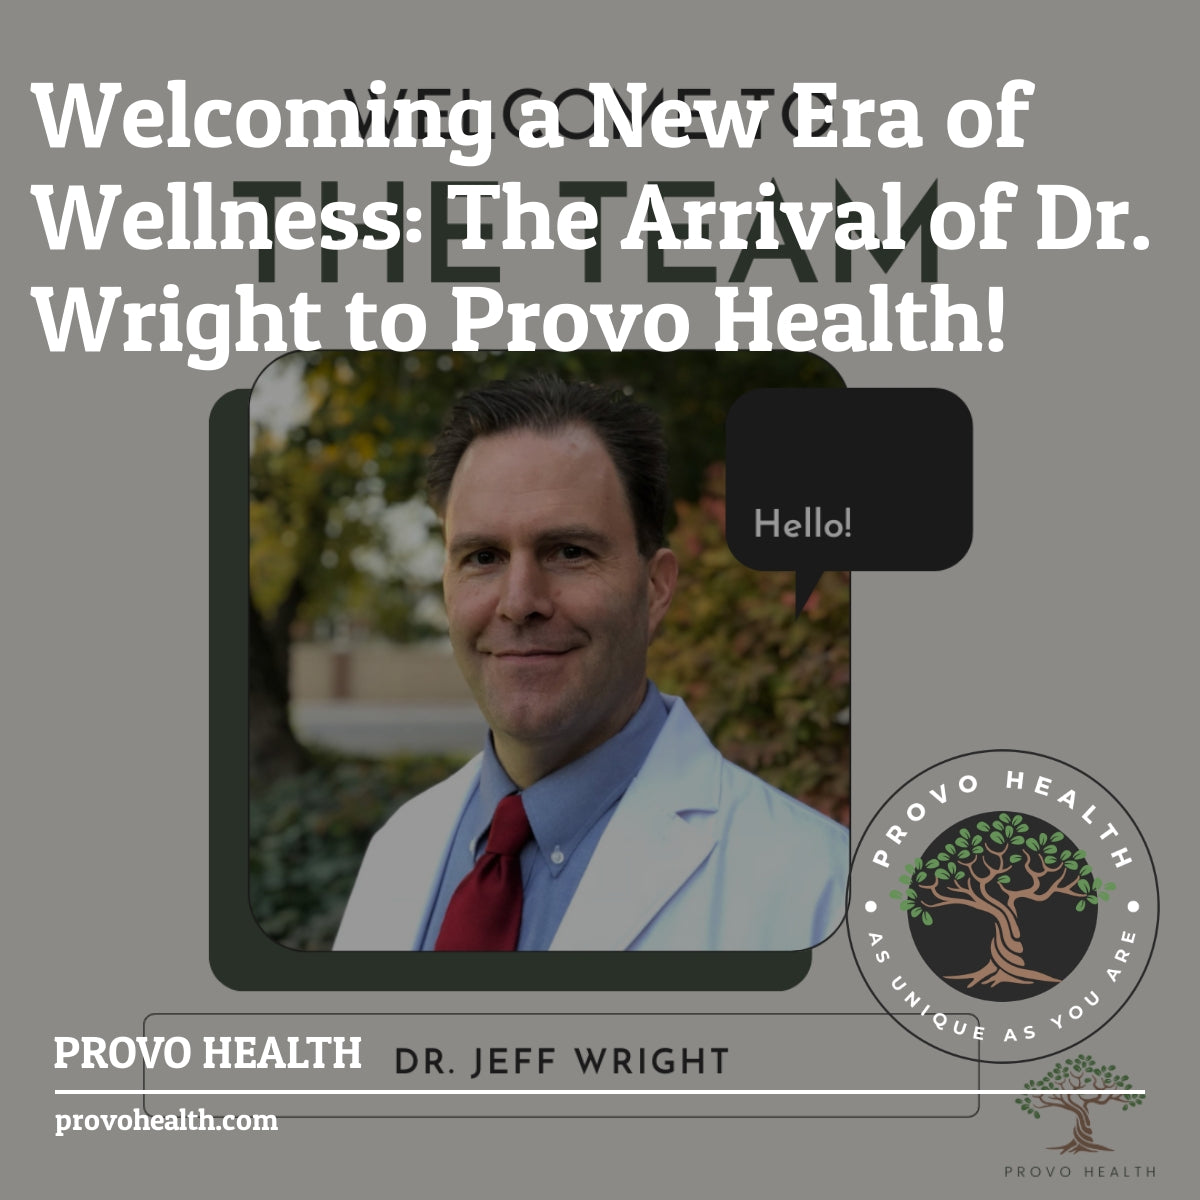 Welcoming a New Era of Wellness: The Arrival of Dr. Wright to Provo Health!